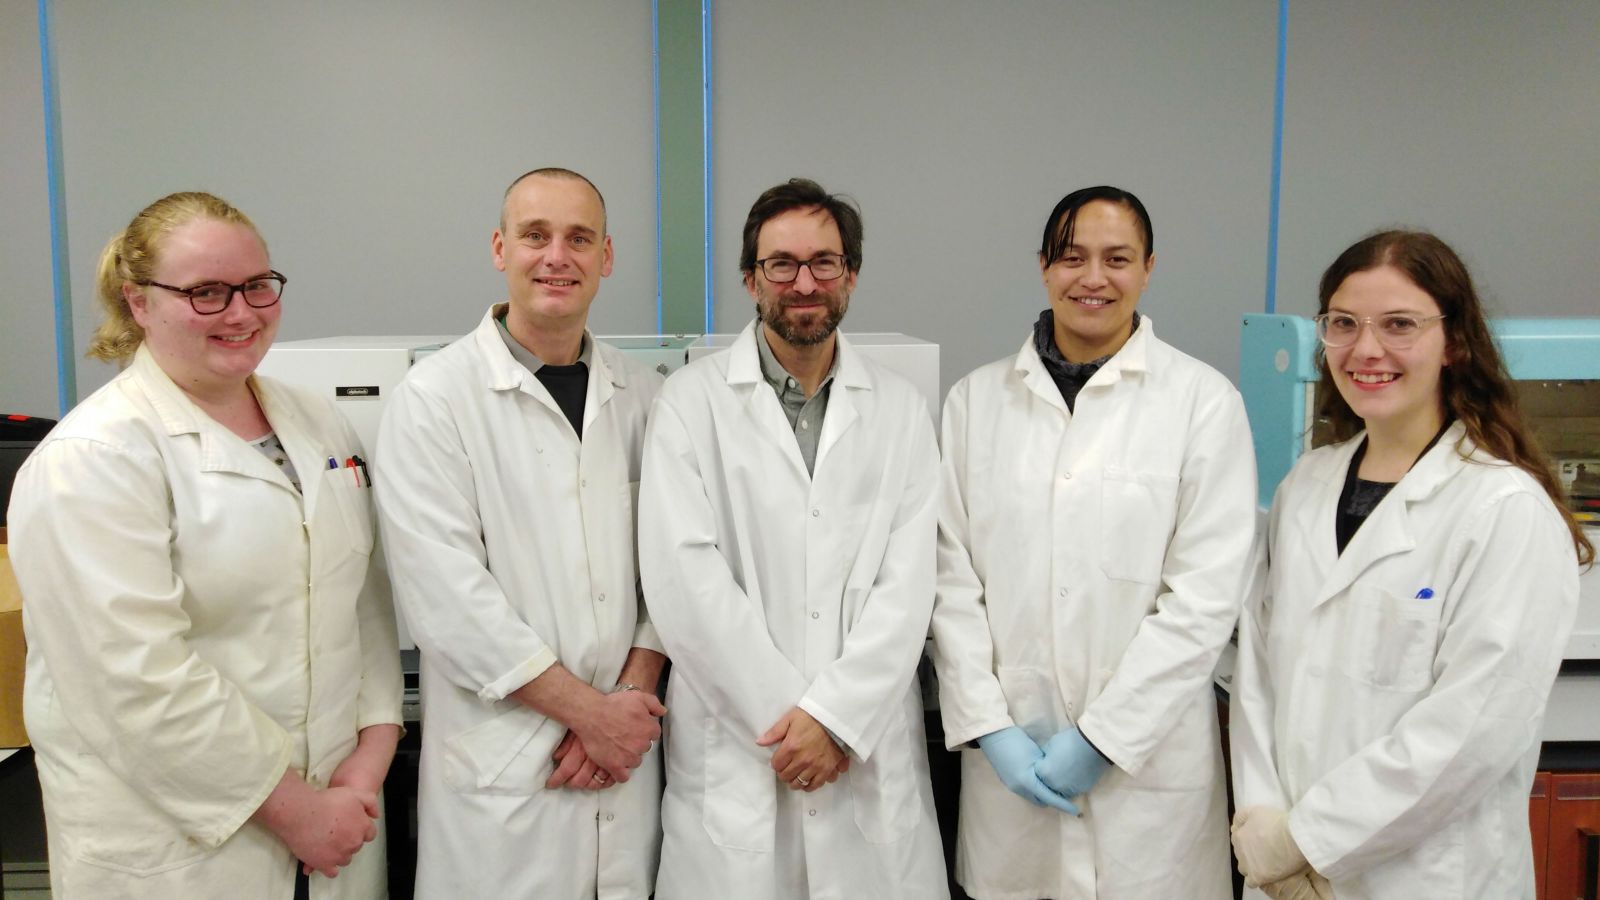 Hikurangi Bioatives students and supervisors from left to right – Storm Blockley-Powell (MSc student), Dr Rob Keyzers (School of Chemical and Physical Sciences), Dr Andrew Munkacsi (School of Biological Sciences), Tia Haira (MSc student), and Lucie Thyne (MSc student).